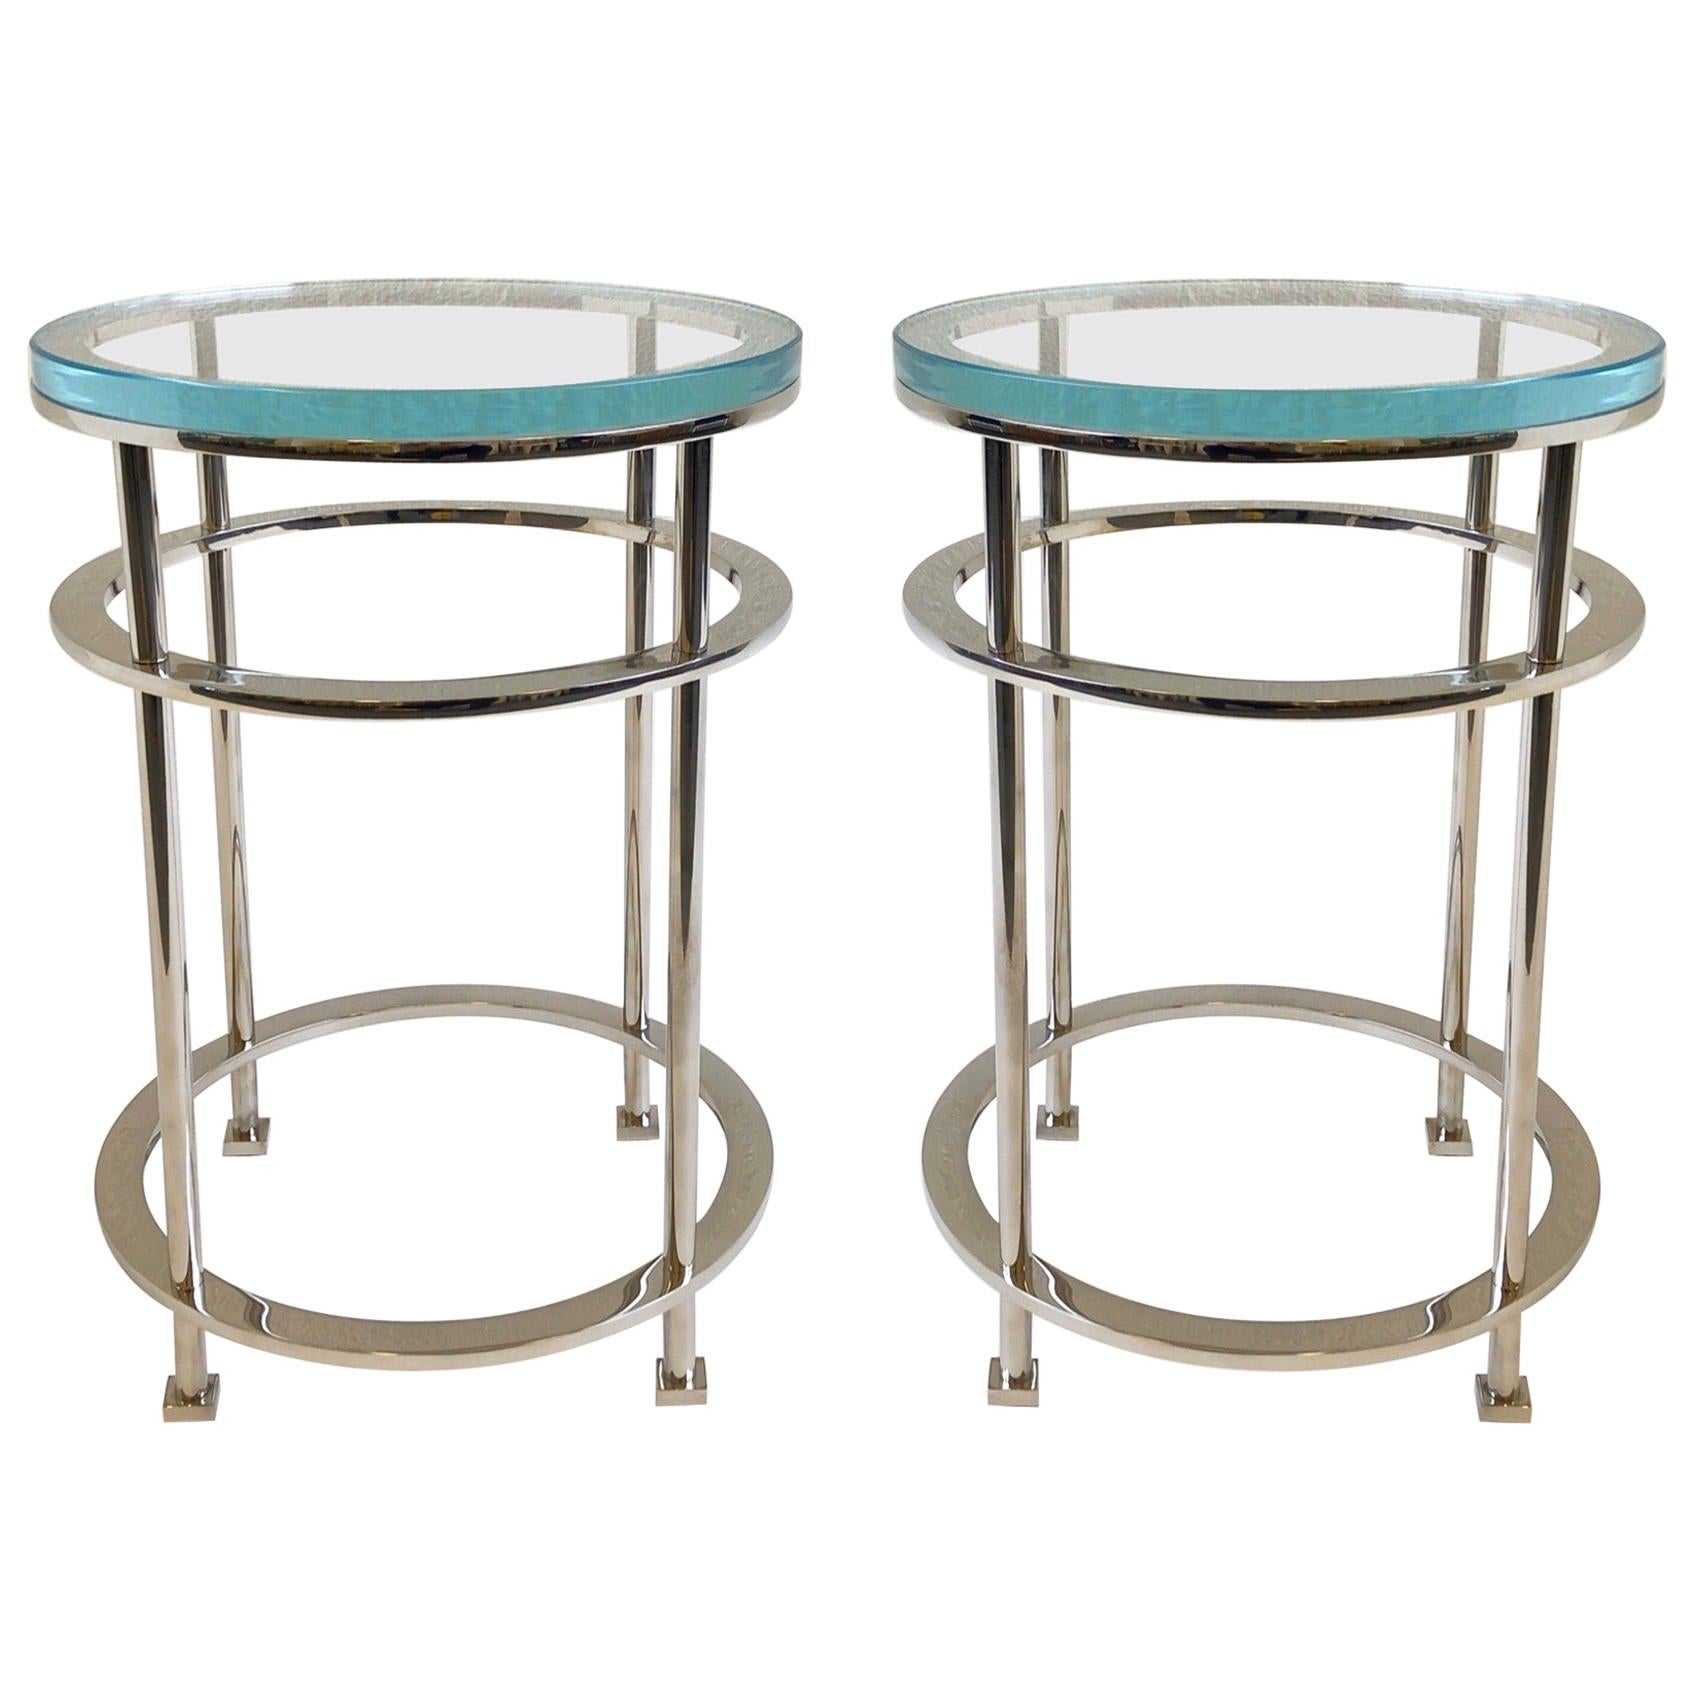 Pair of Nickel and Lucite Side Tables by Jean Michel Wilmotte for Mirak